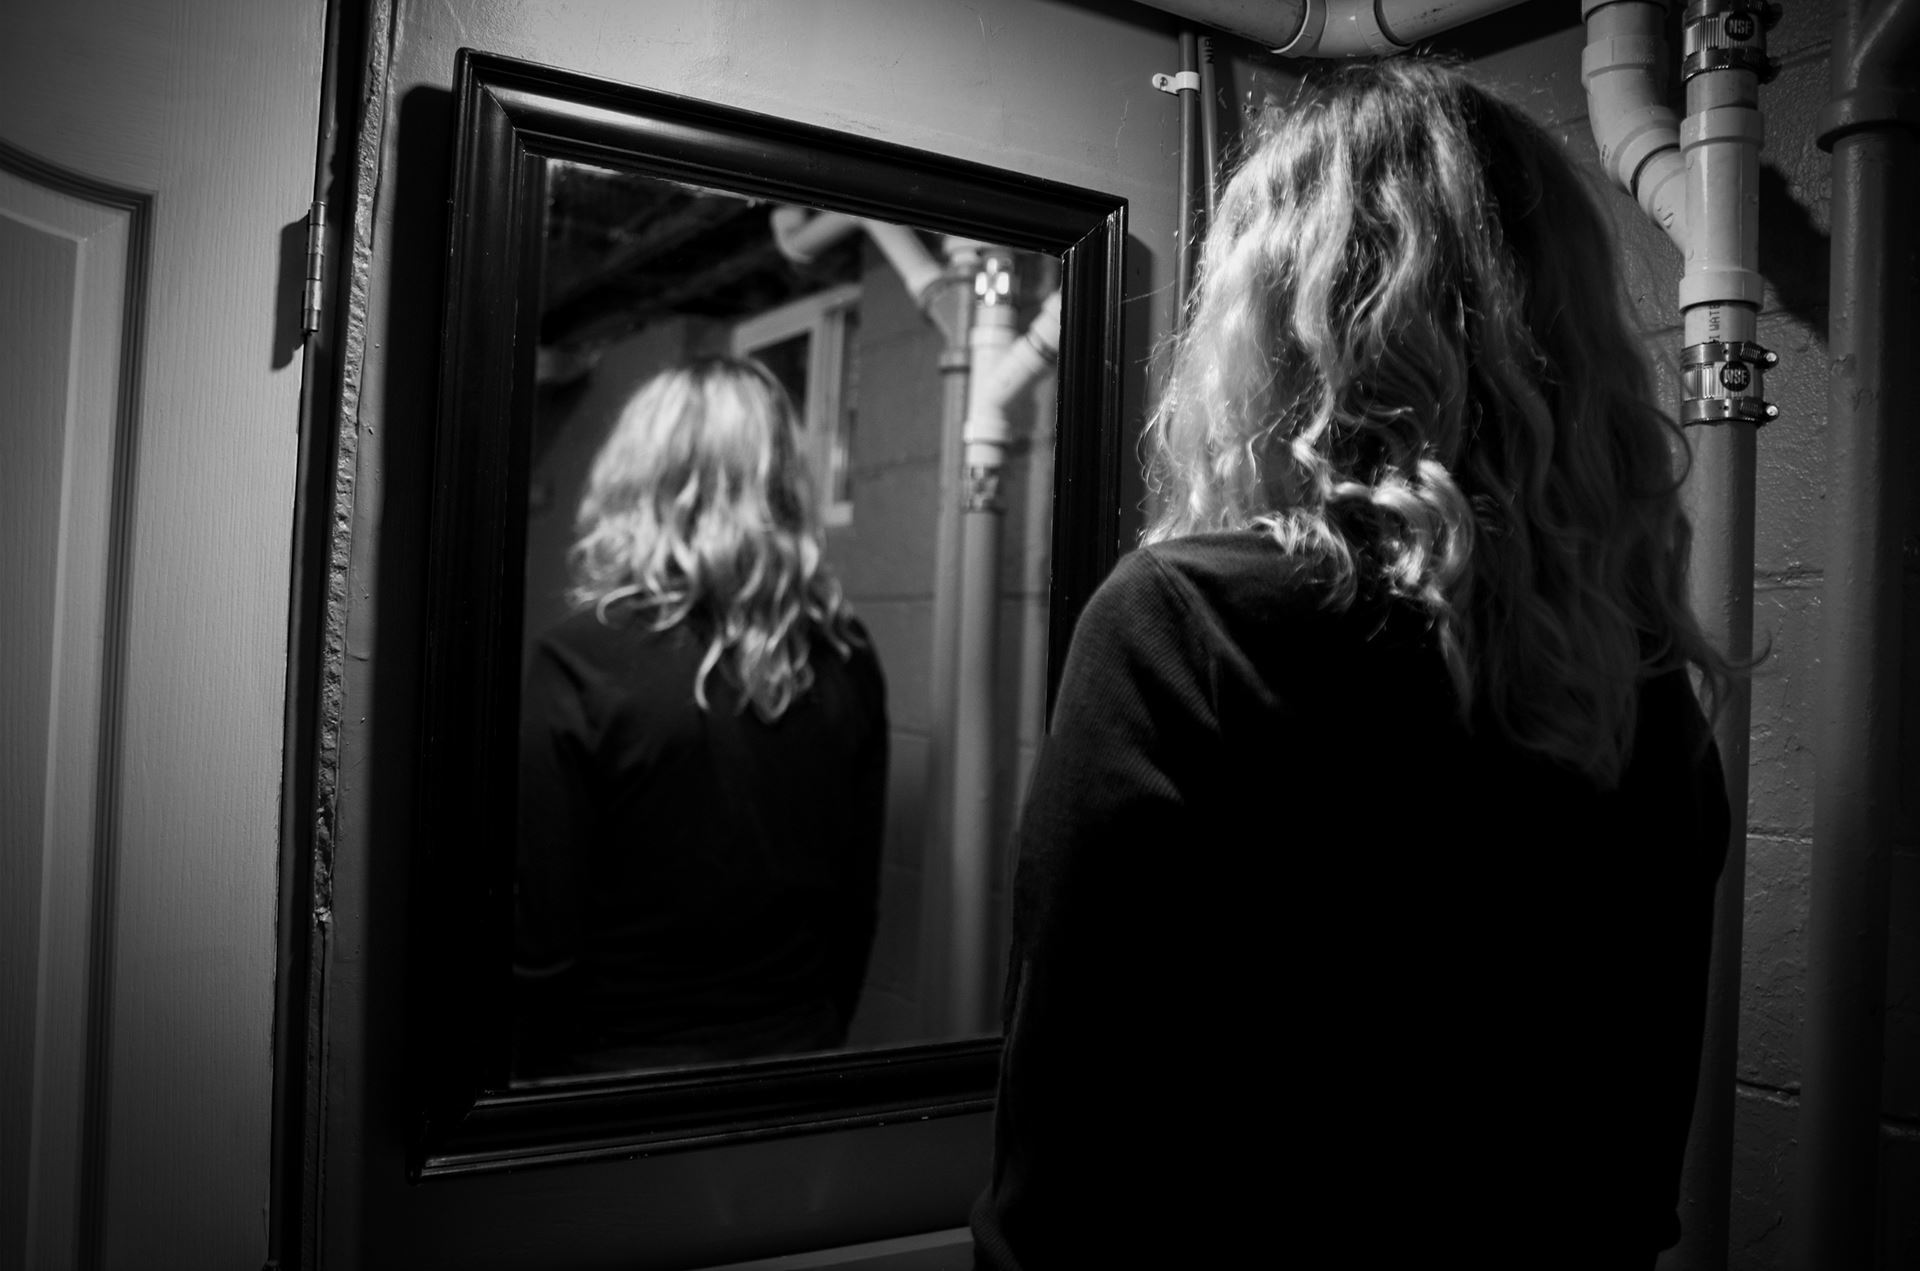 Black and white photo, person facing away at a mirror, which also shows them facing away. Annie Suckow, “Reflections I,” digital photo, 8.5"x11"